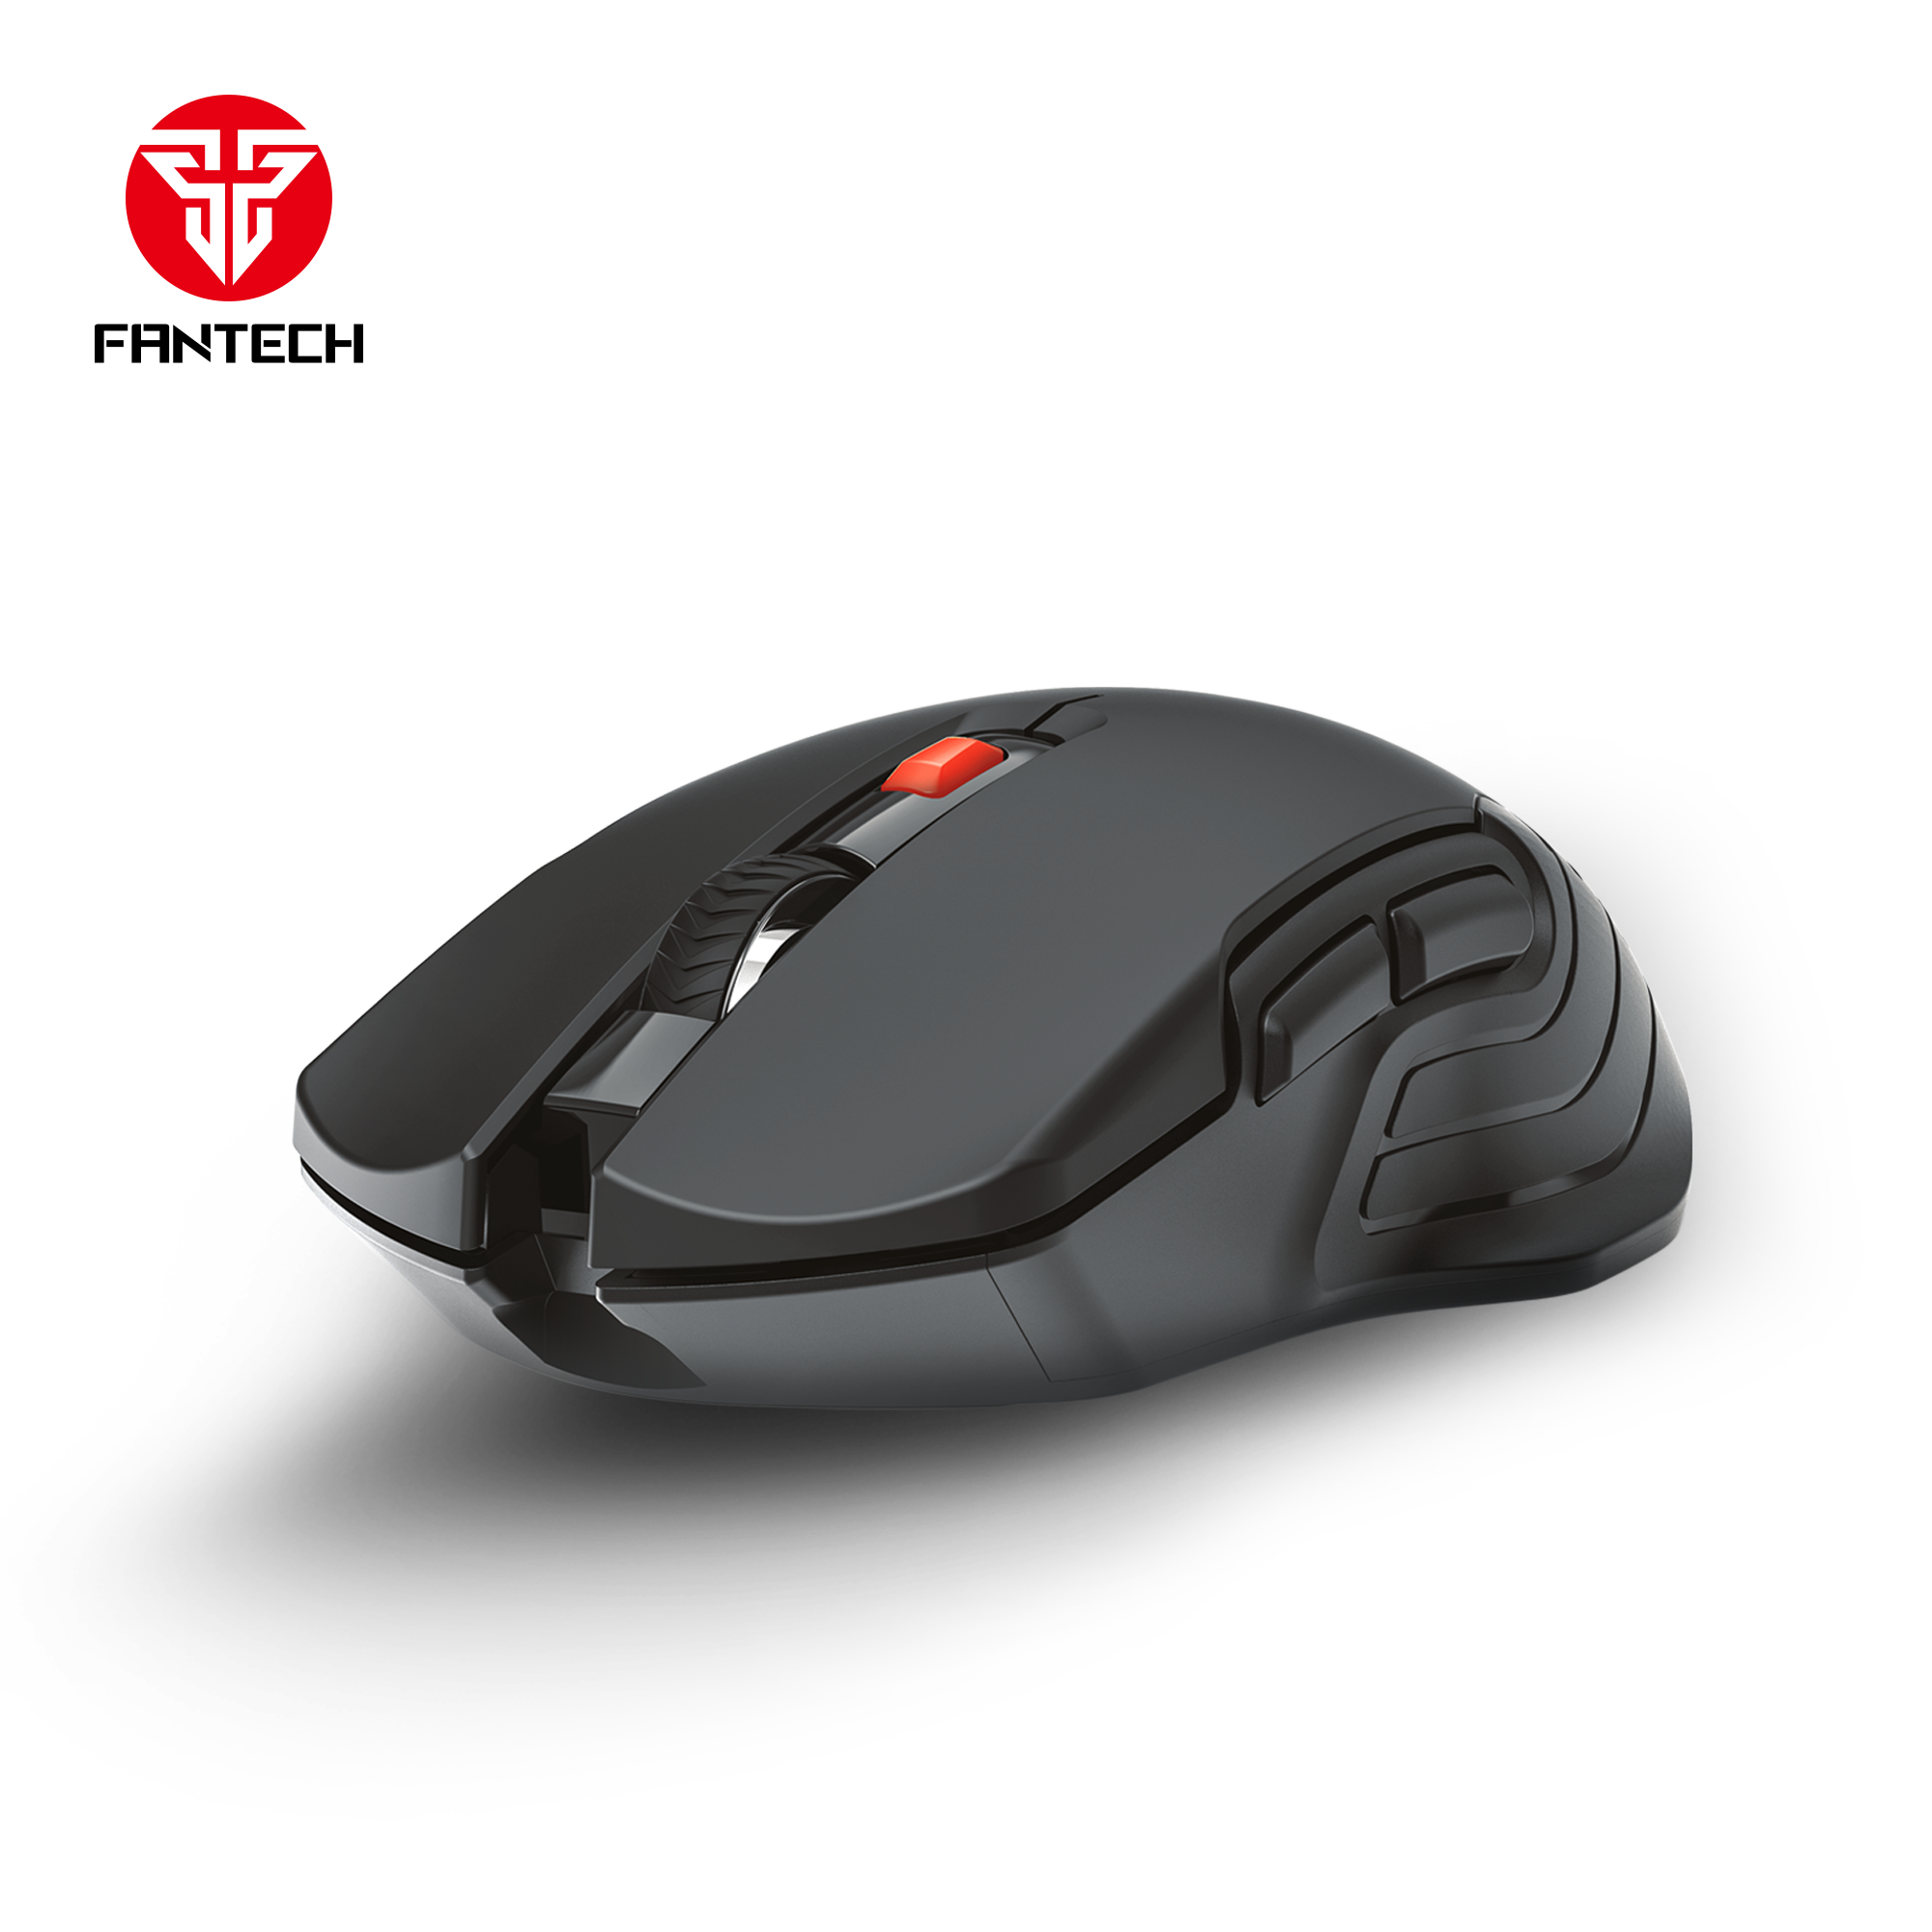 Fantech Raigor III WG12 Gaming Mouse With 2.4GHz Wireless Connection Mouse 12